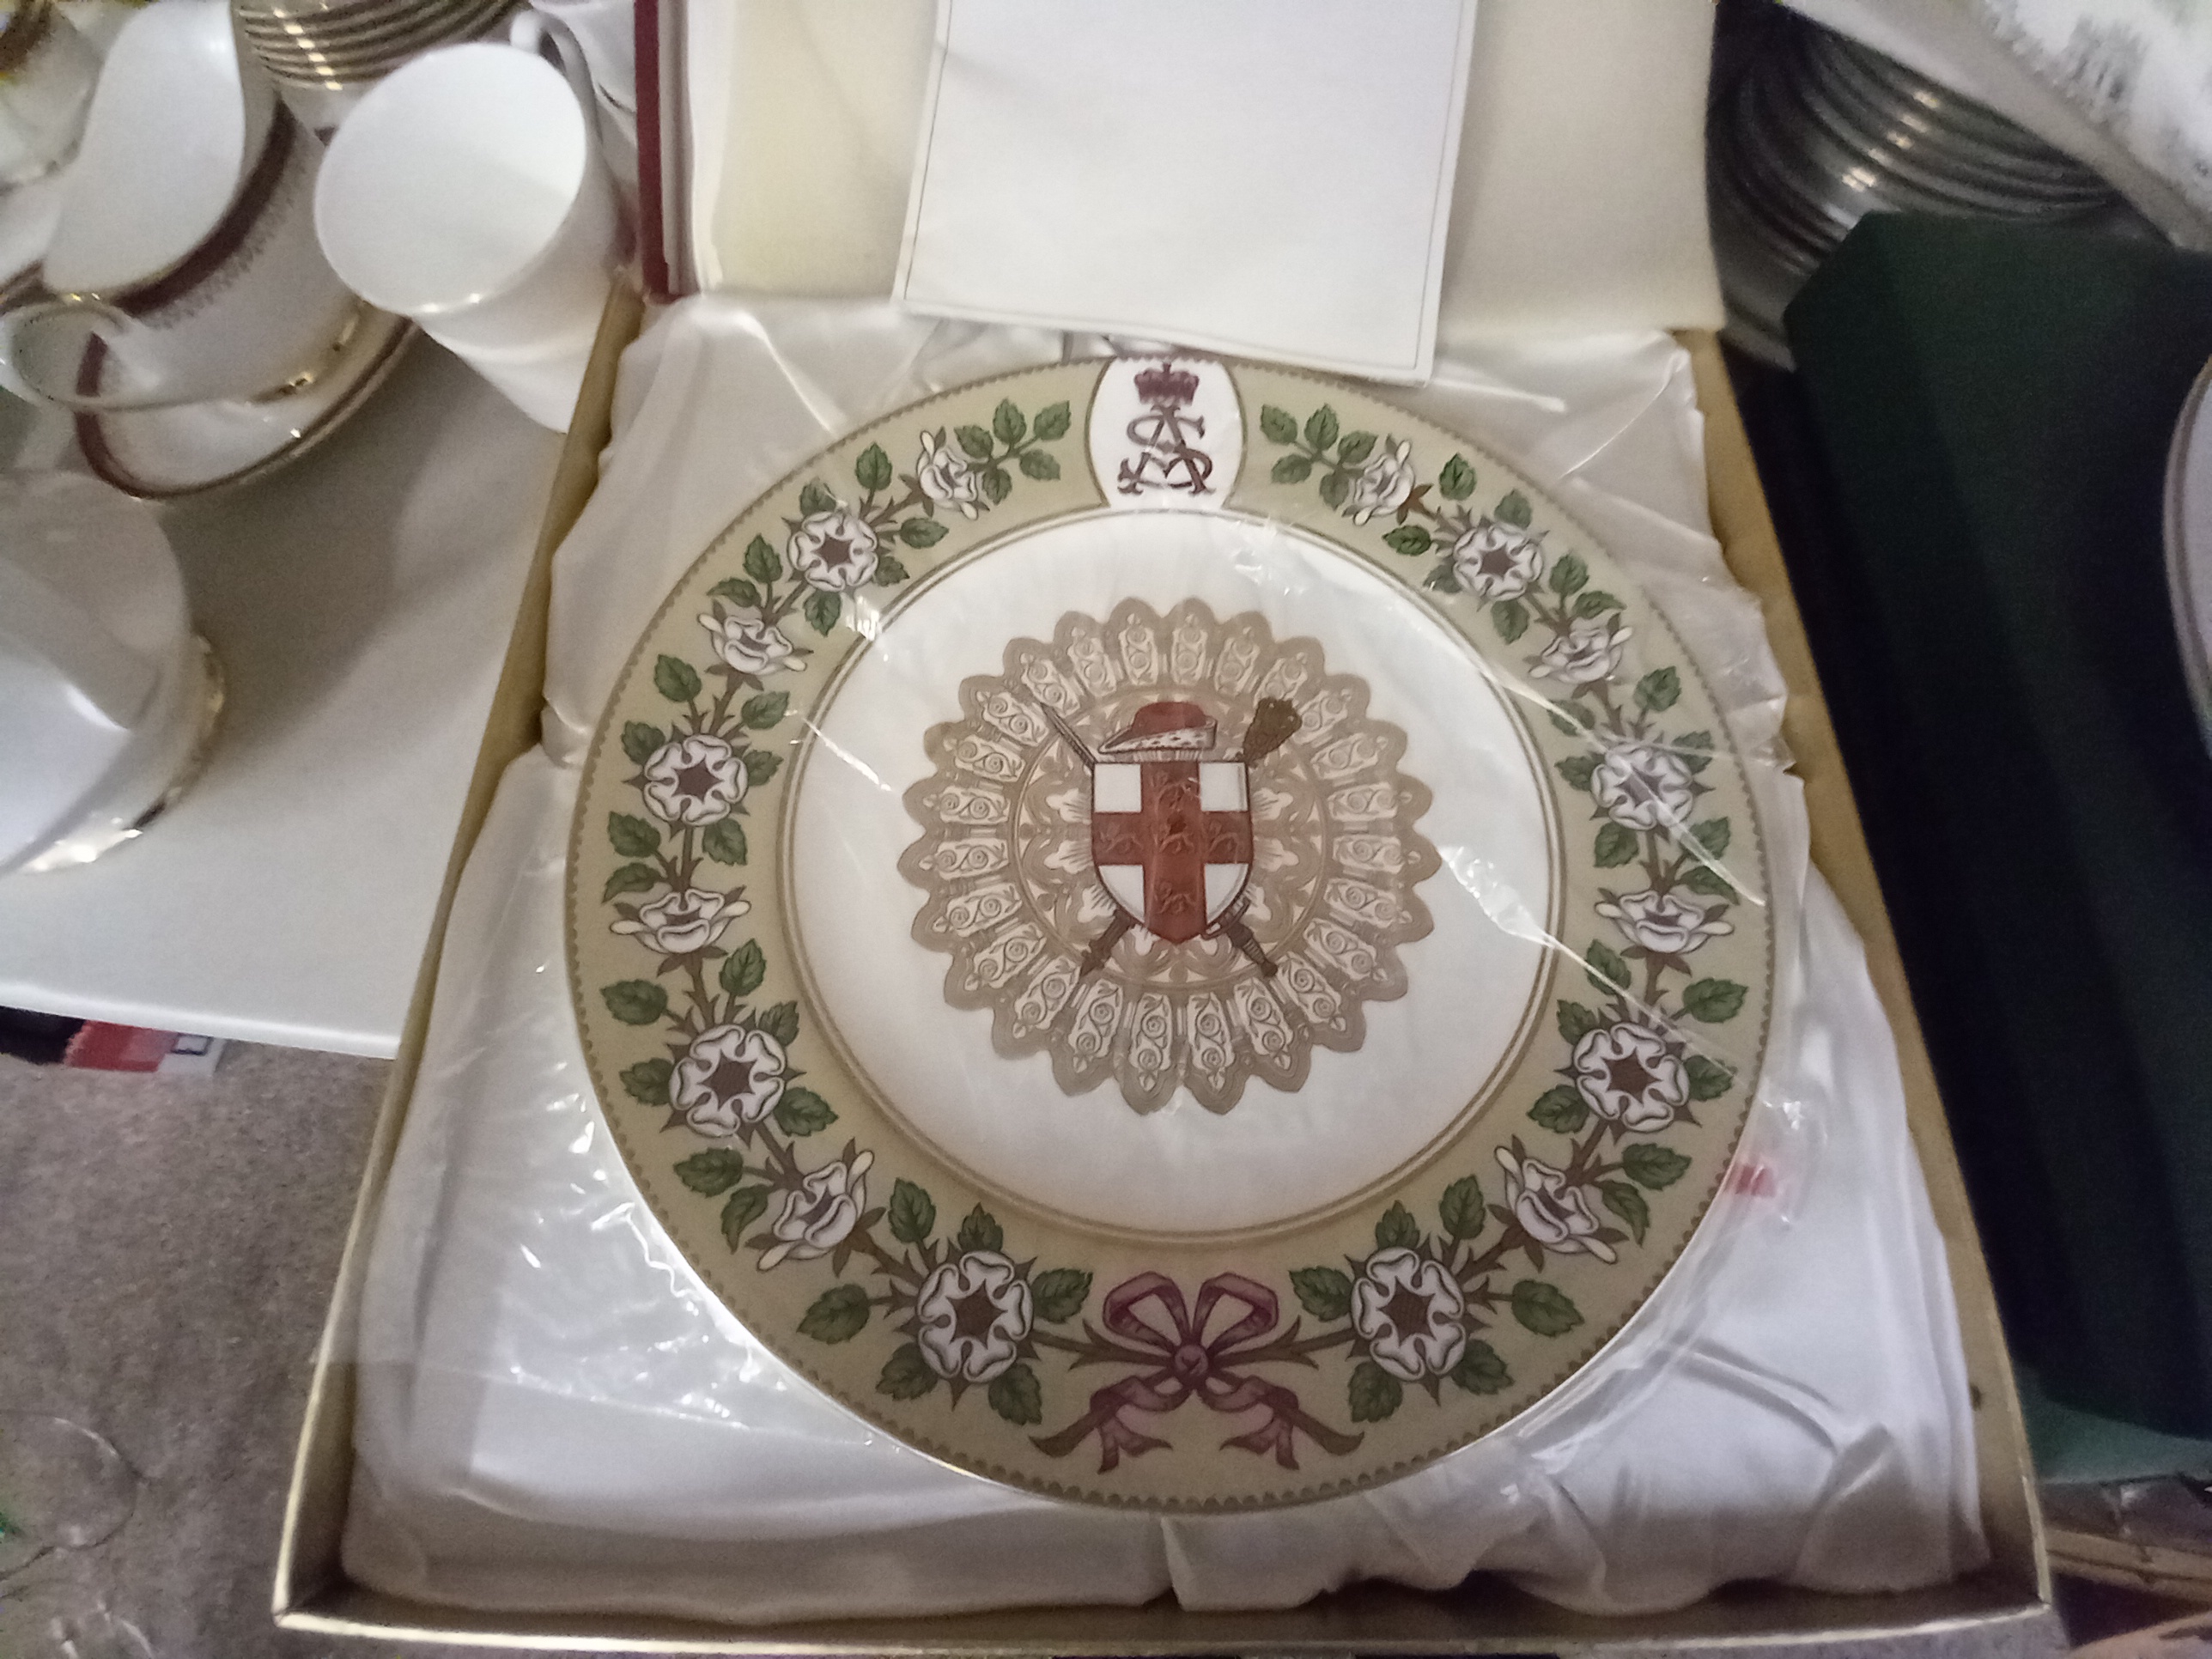 ROYAL DOULTON ' RONDELAY' DINNER SERVICE, YORK MINSTER ITEMS & LIMITED EDITION PLATES" - Image 10 of 11